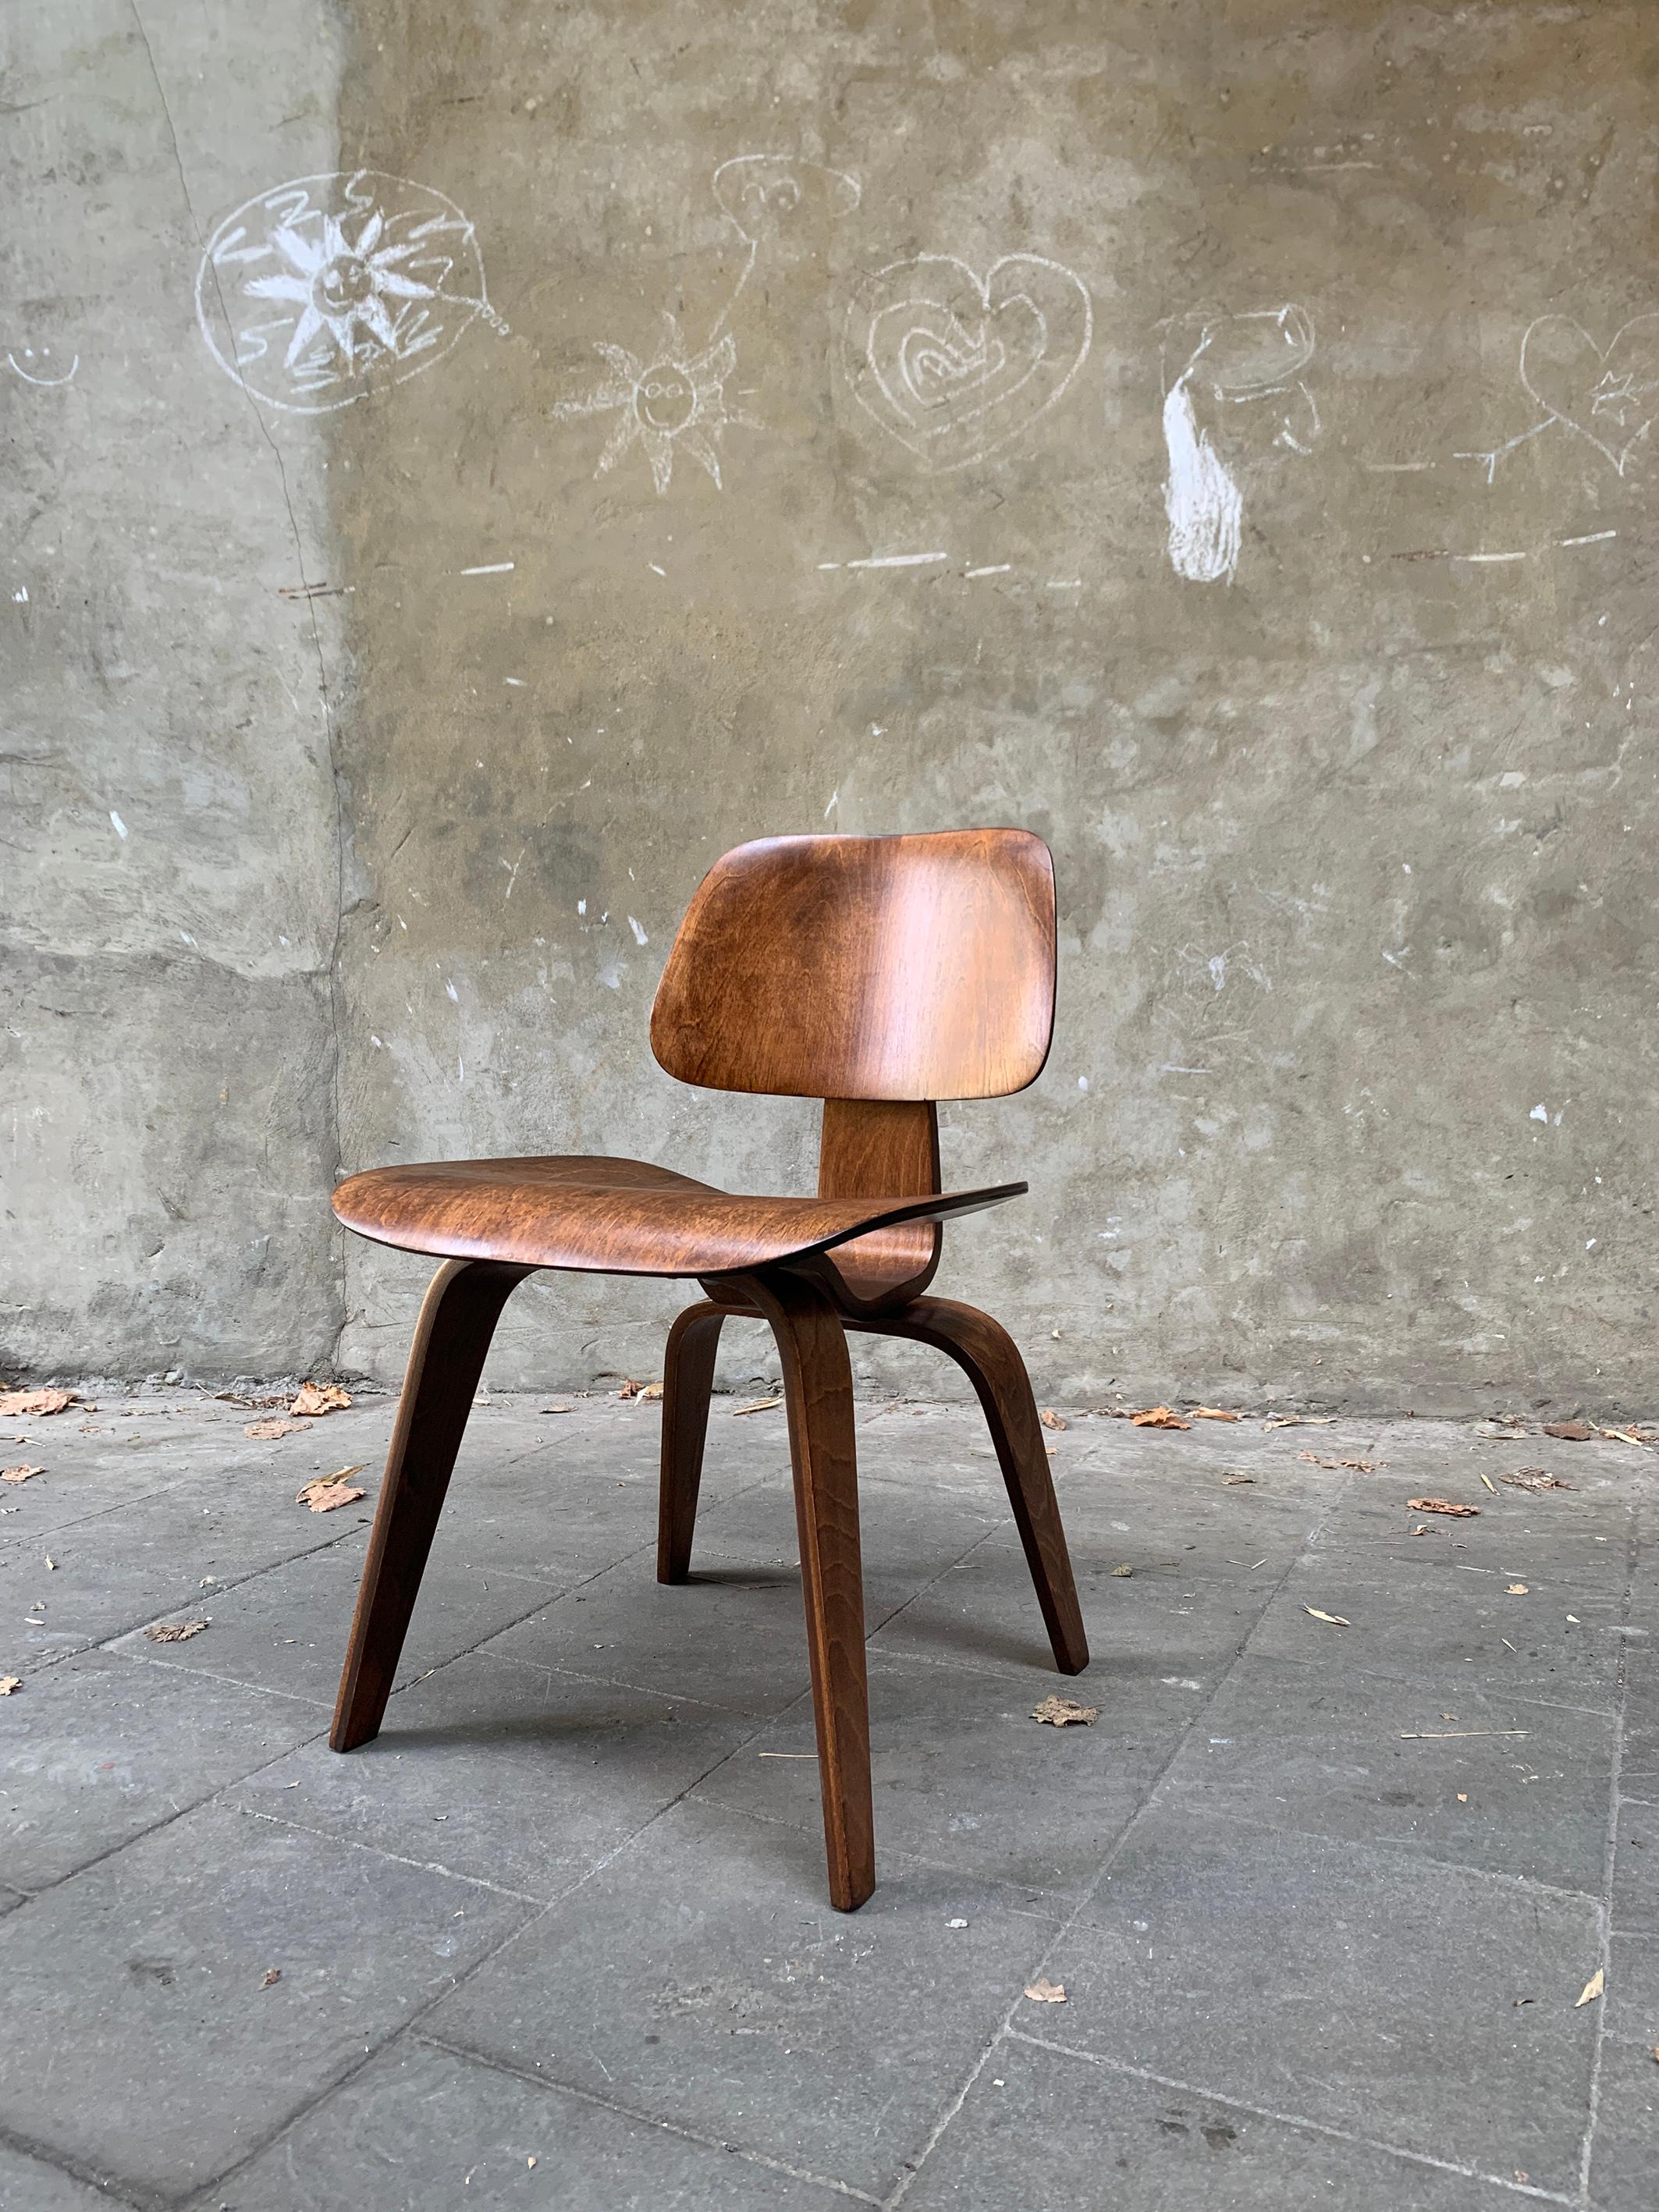 The DCW (=Dining Chair Wood) chair was designed by Charles and Ray Eames around 1945.
		
This is a first generation chair produced by Evans Molded Plywood Company between 1946 and 1948 (Herman Miller bought the Evans Plywood Division in 1949 and